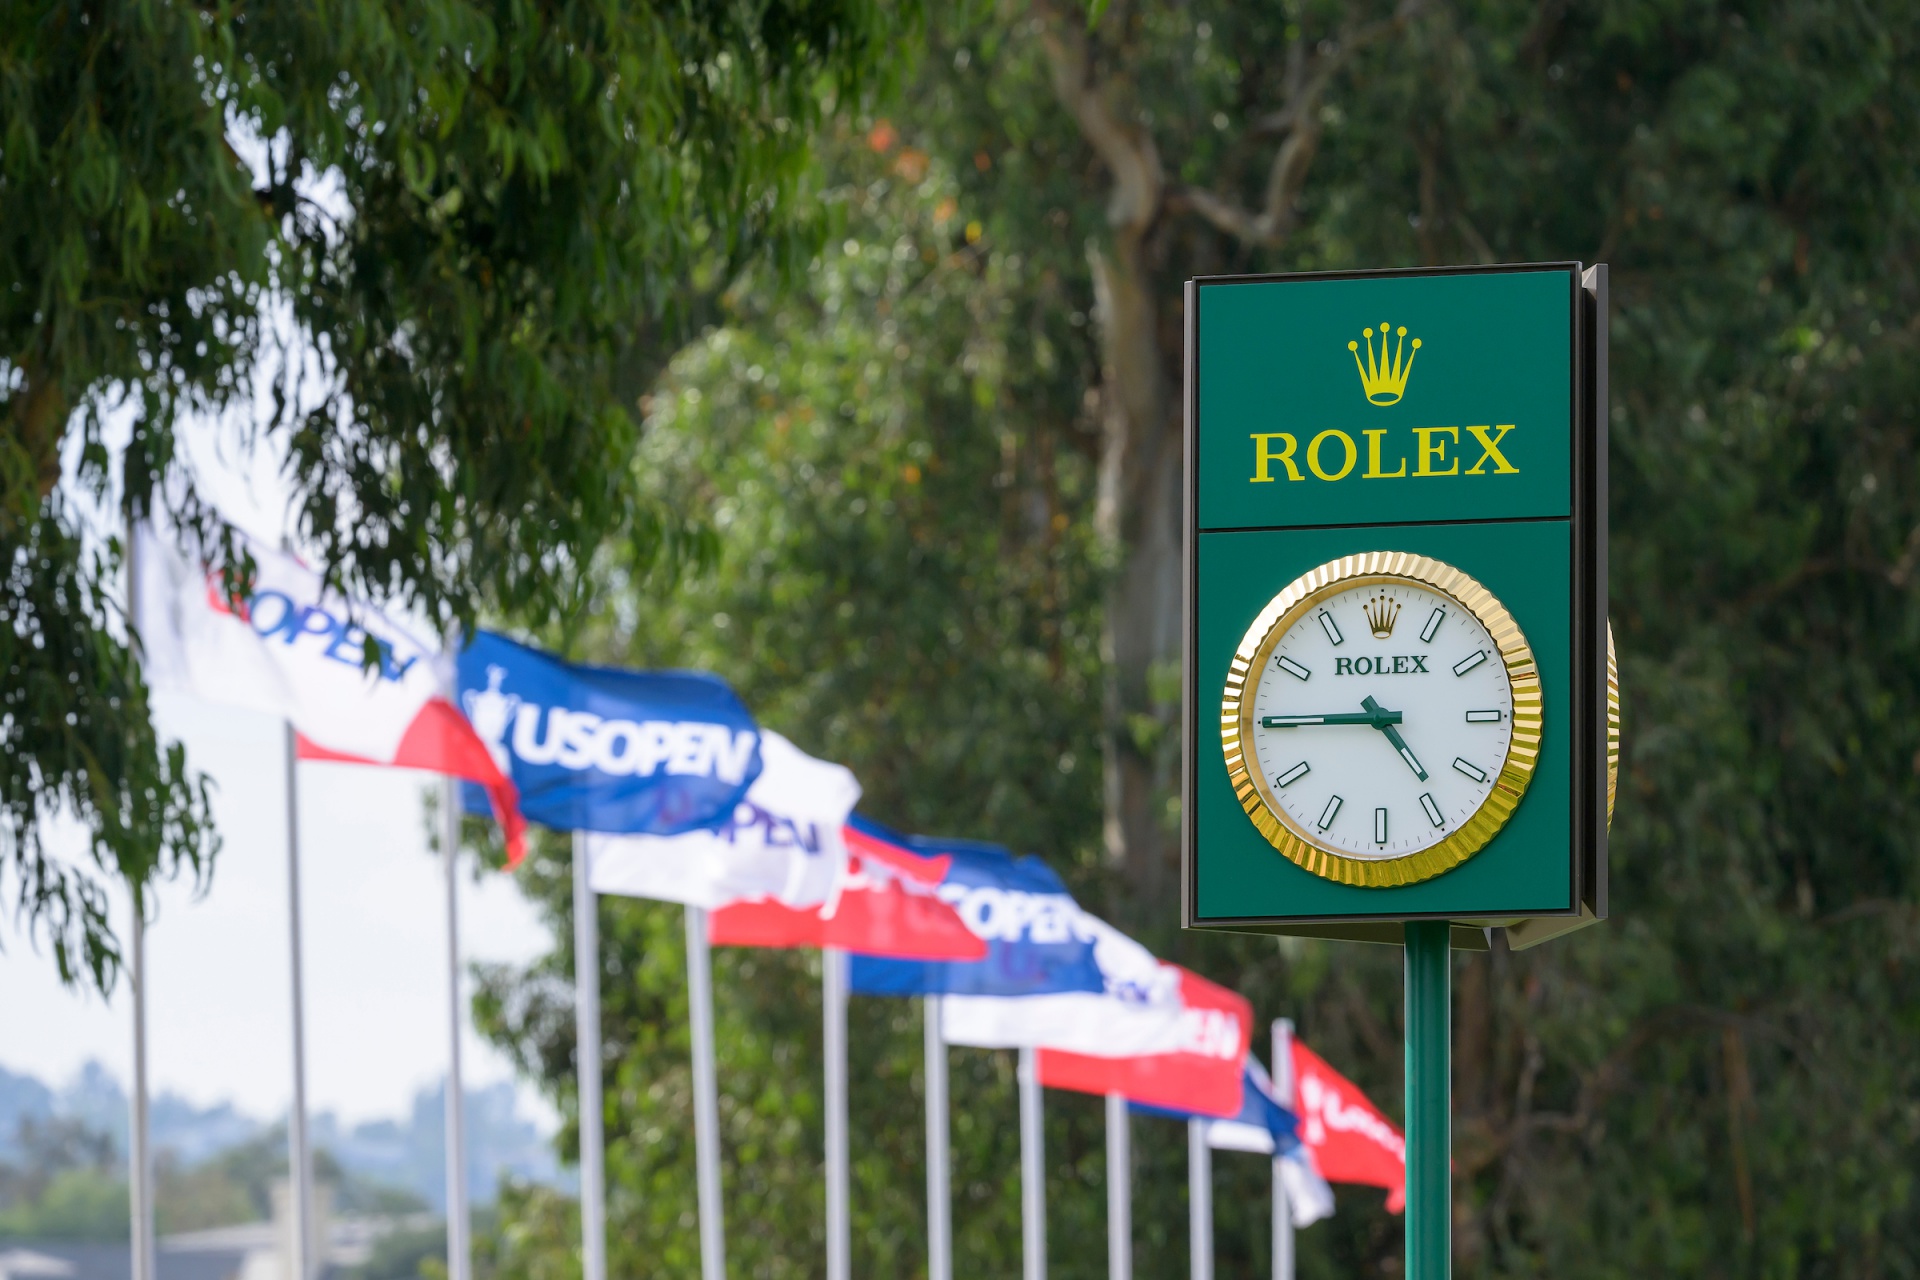 ©Rolex_Chris_Turvey_A_ROLEX_CLOCK_IN_FRONT_OF_THE_U.S._OPEN_FLAGS_(1).jpg (526 KB)